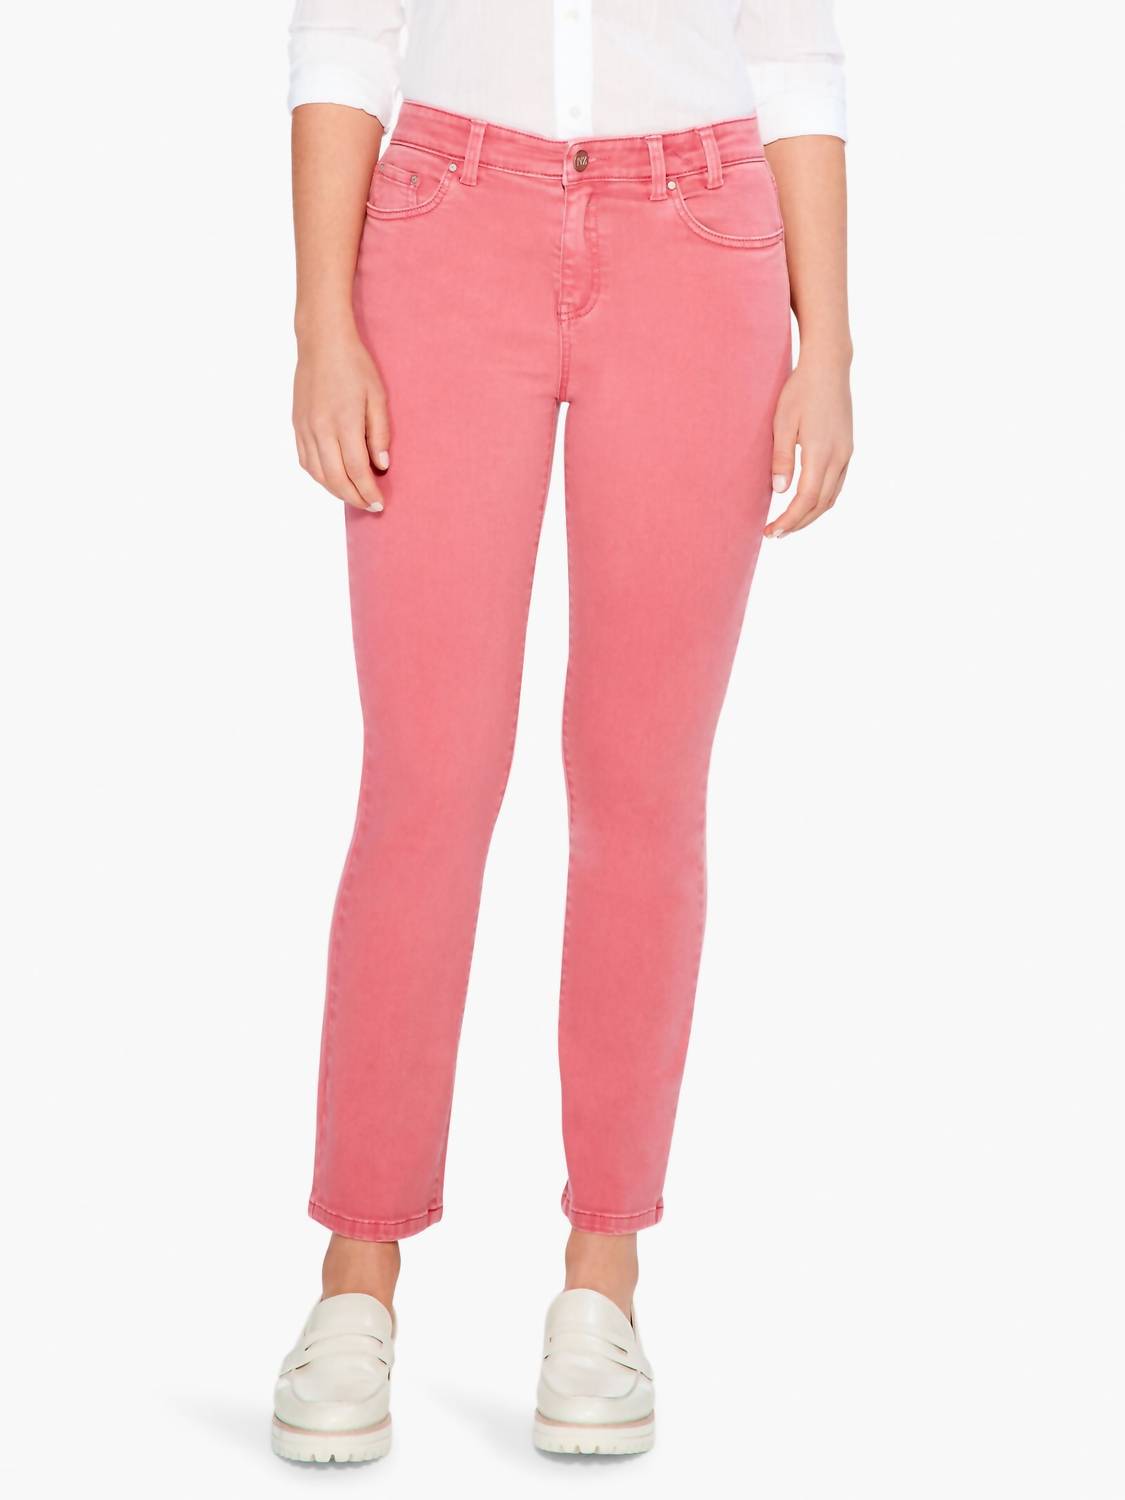 NIC + ZOE Colored Mid Rise Straight Ankle Jeans in Dusty Cedar